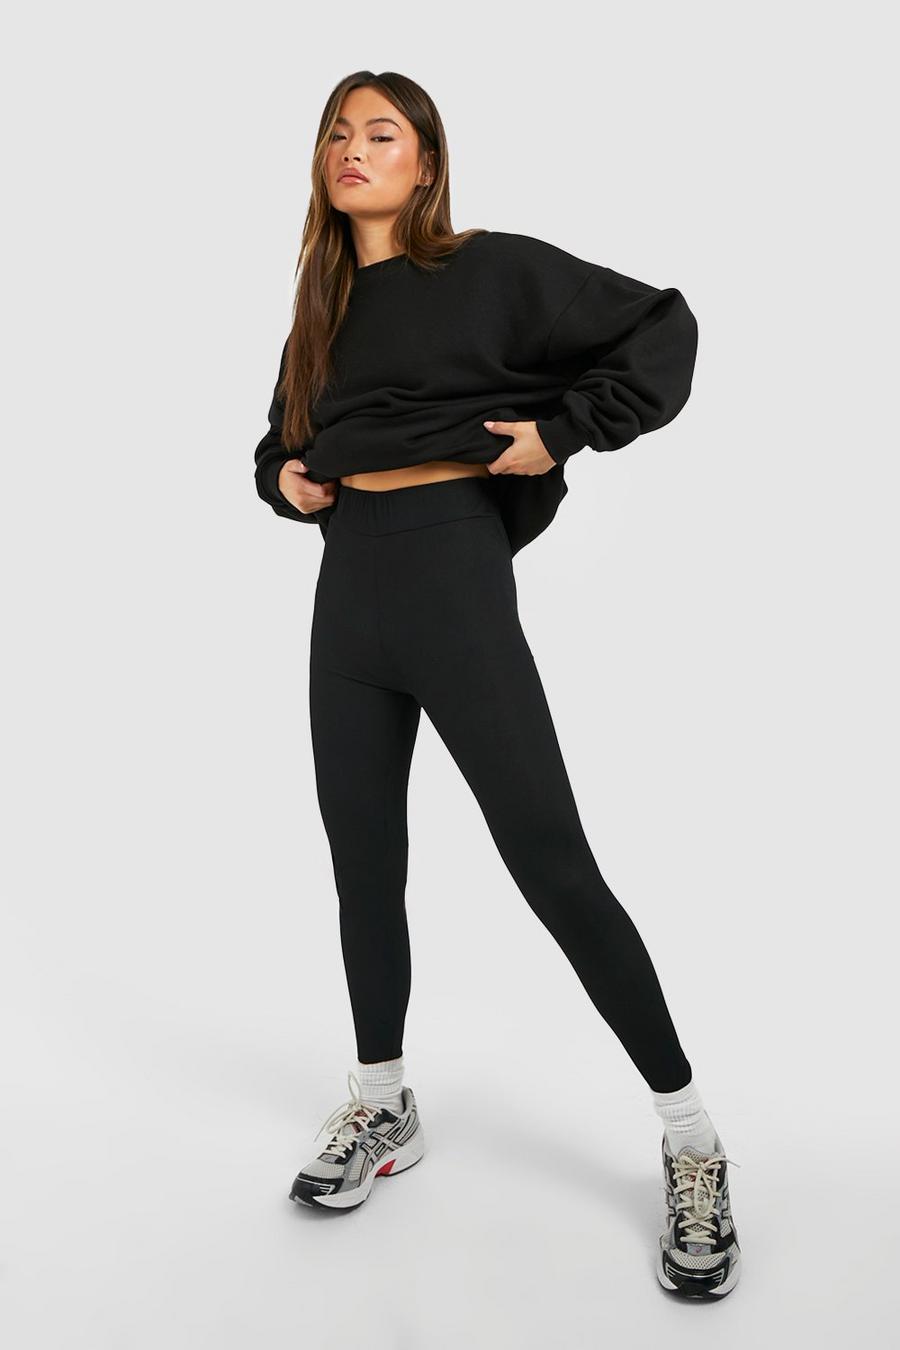 Boohoo Soft Rib Knit Long Sleeve Top And Leggings Co-ord in Black